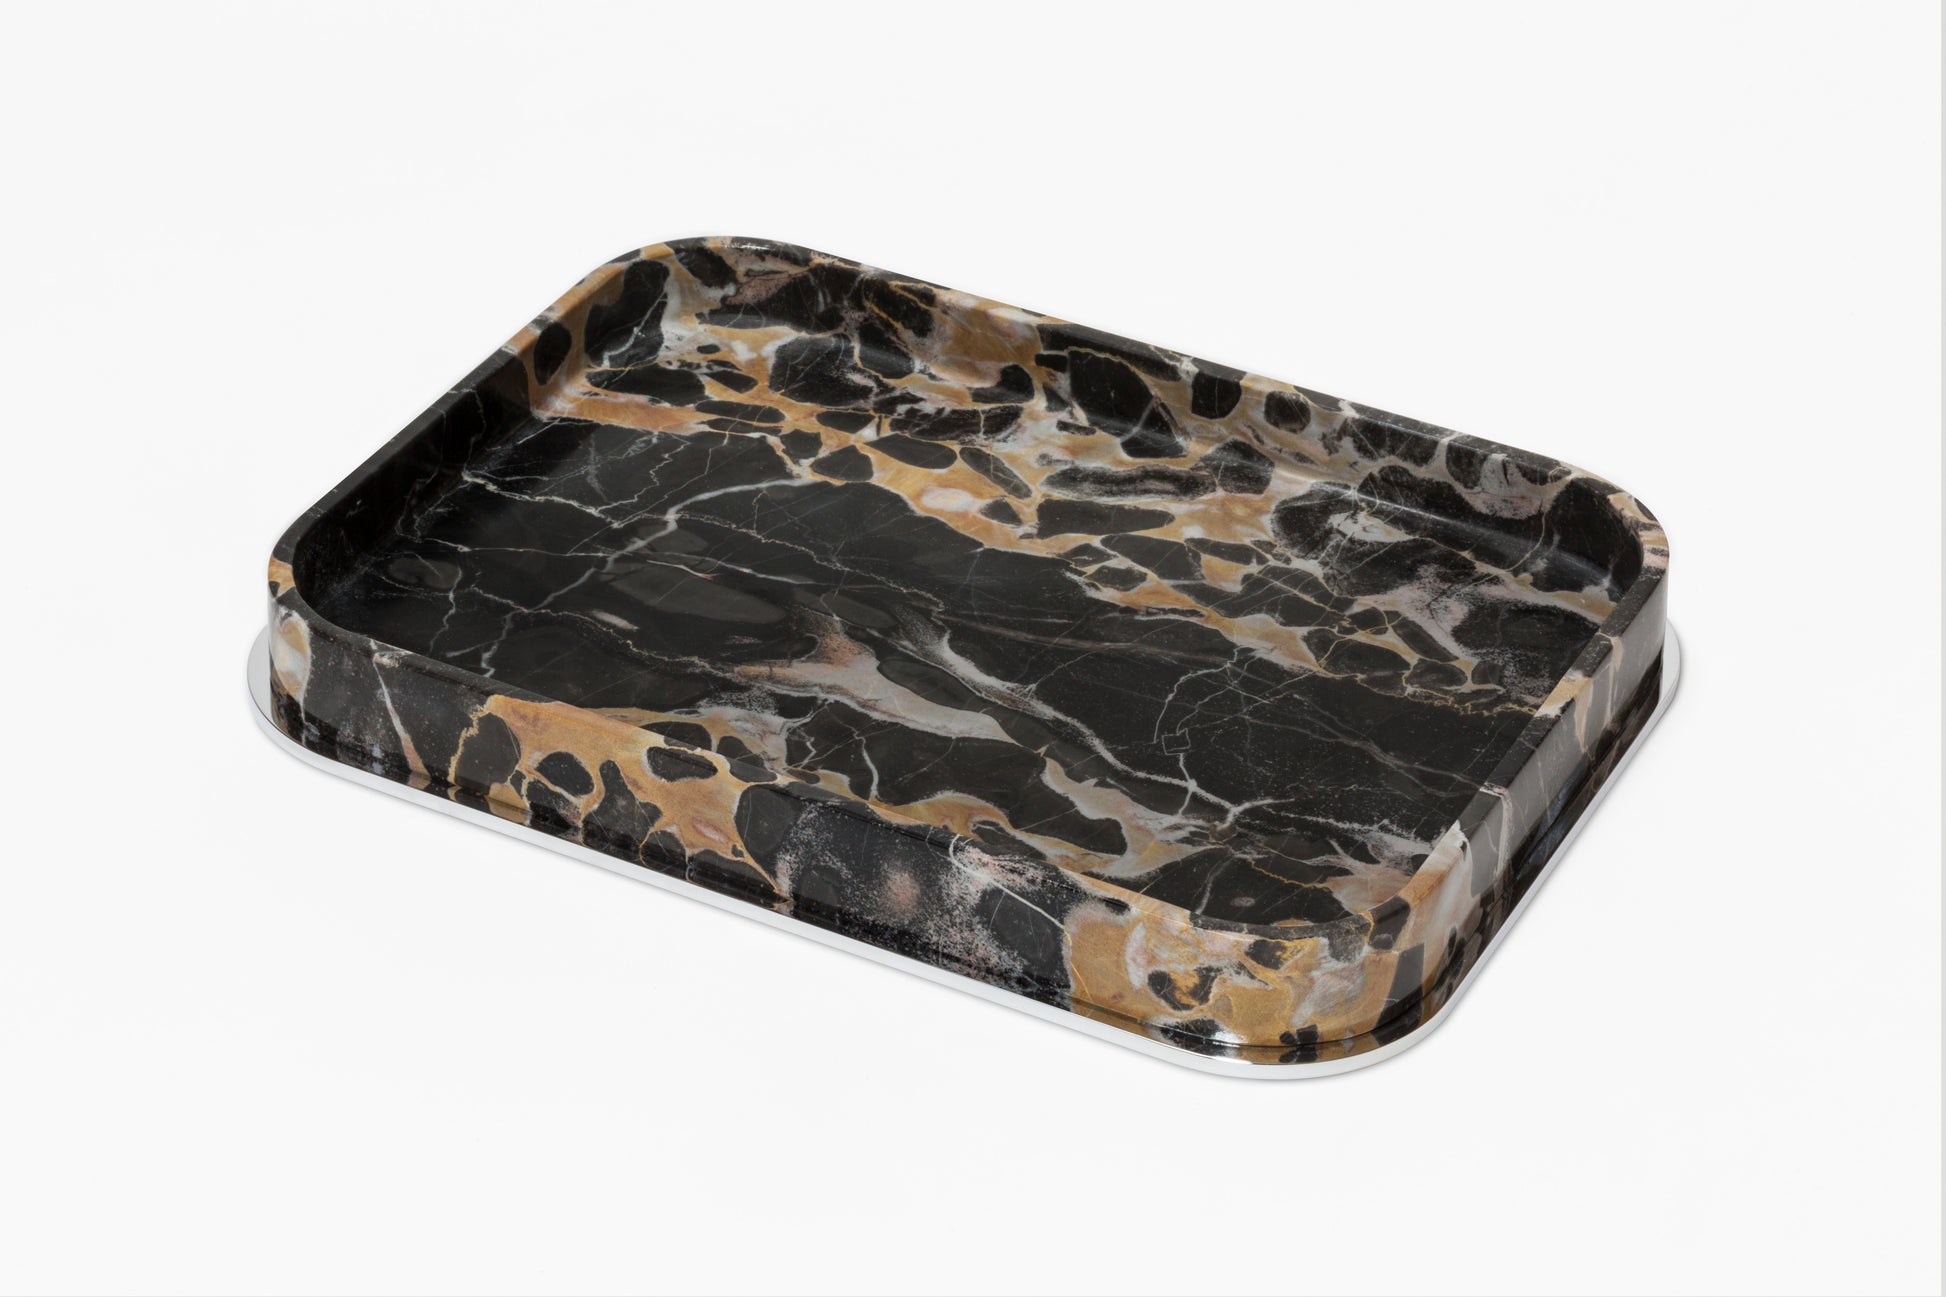 Giobagnara Positano Marble Valet Tray Rectangular | Marble Structure with Brass Base Frame | Non-Slip Waterproof Rubber Base | Stylish and Functional Home Organization | Explore a Range of Luxury Home Decor at 2Jour Concierge, #1 luxury high-end gift & lifestyle shop